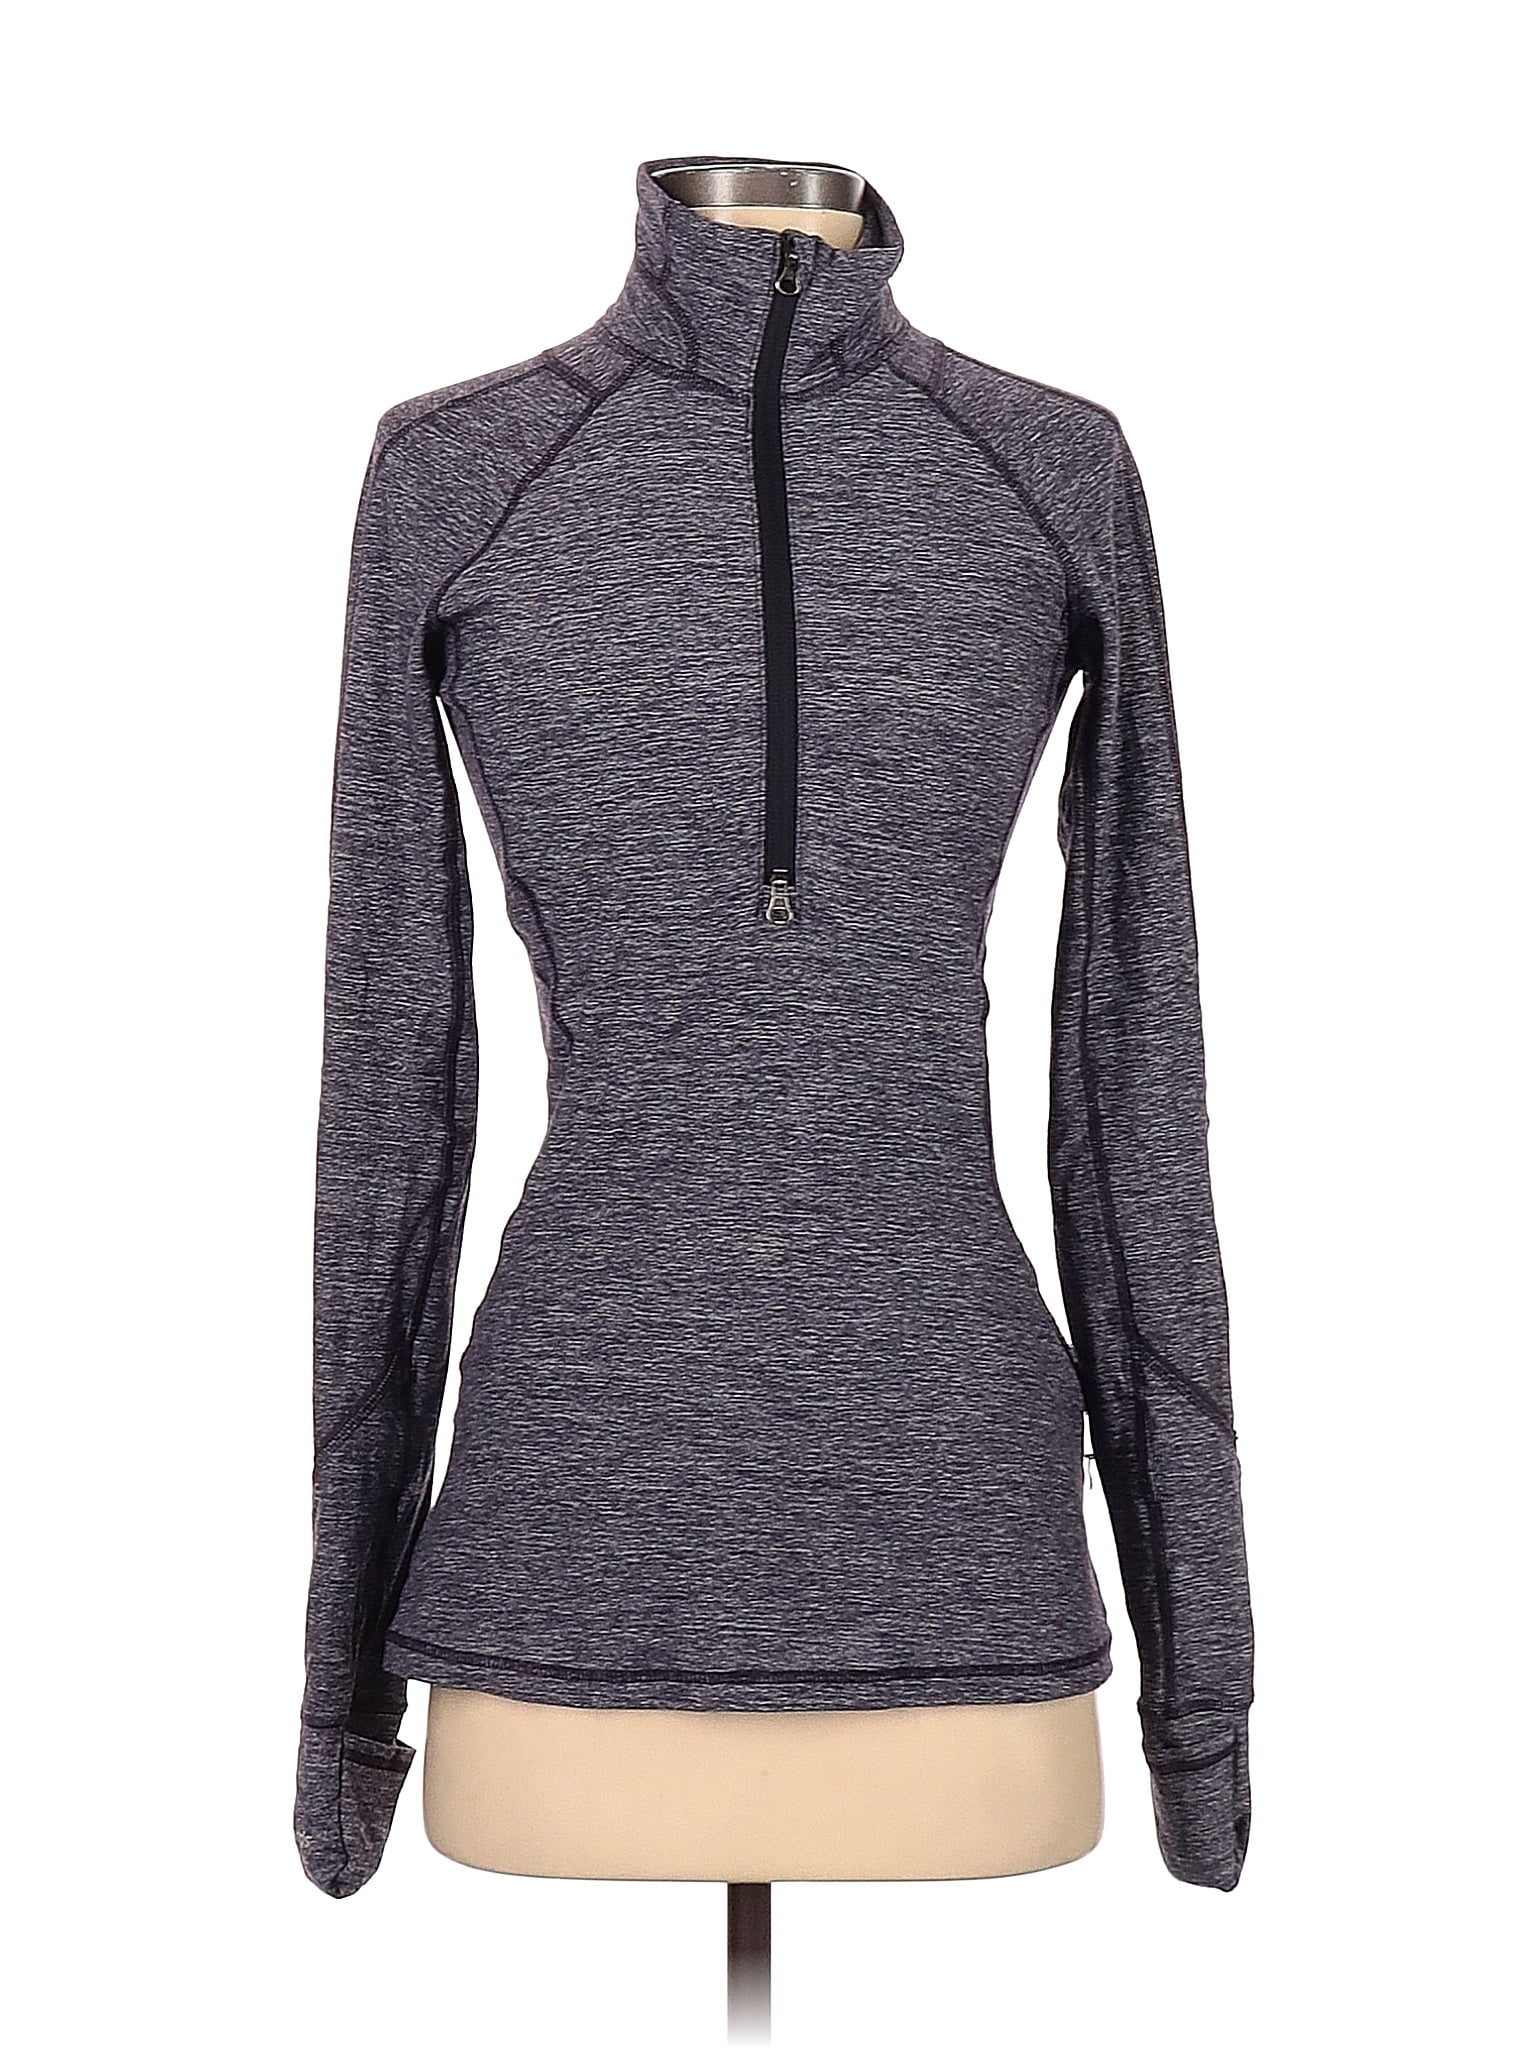 Pre-Owned Lululemon Athletica Womens Size 4 Track Togo